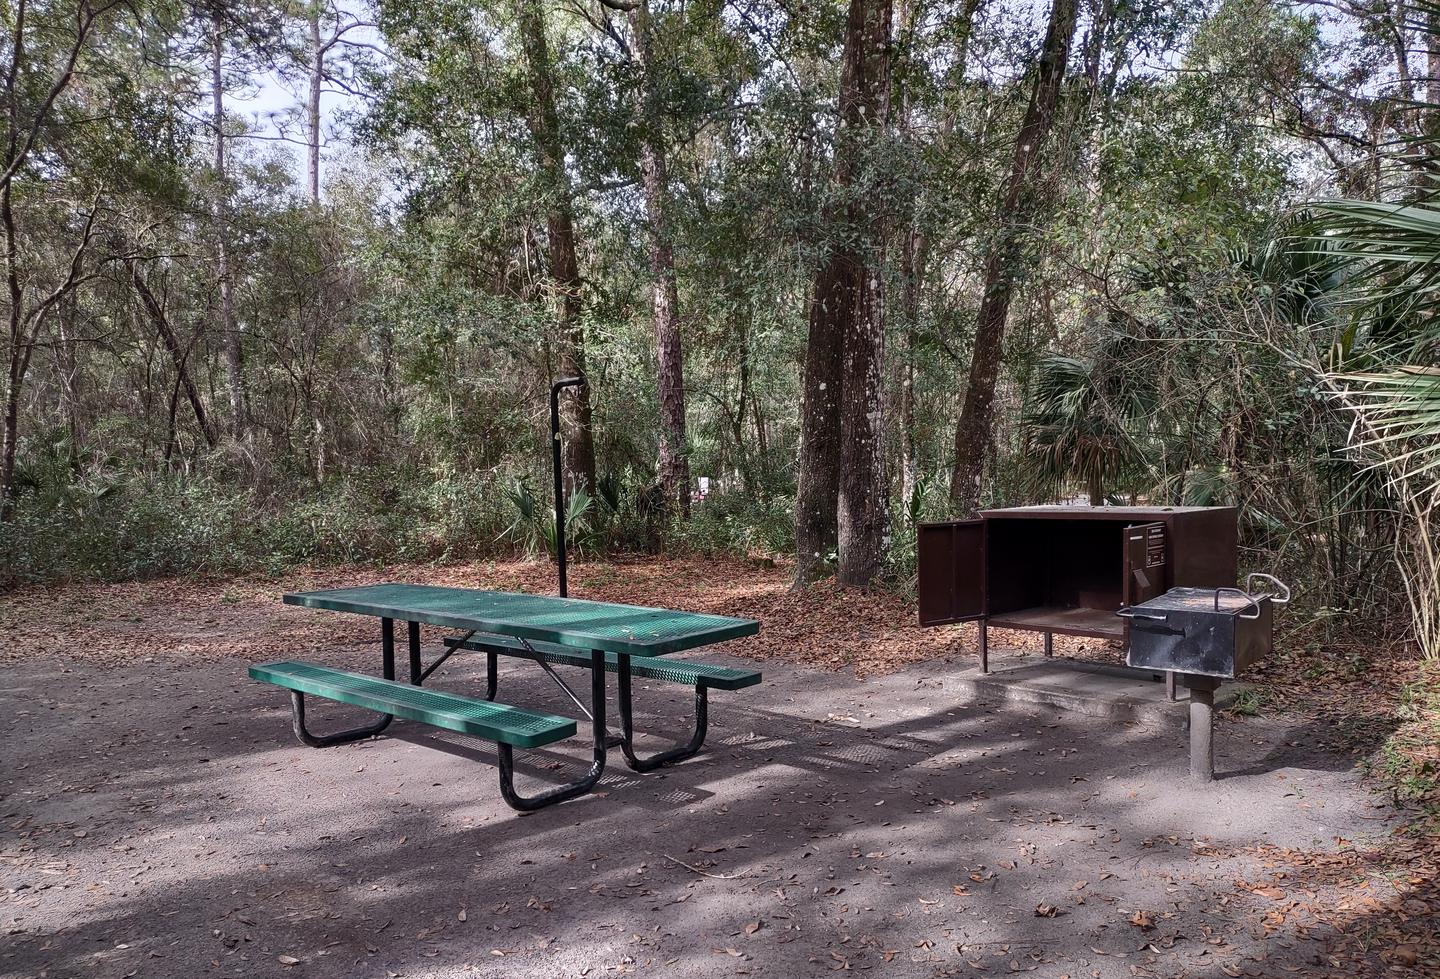 View of site 61Amenities: fire ring, picnic table, light pole, grill, bear-proof storage locker